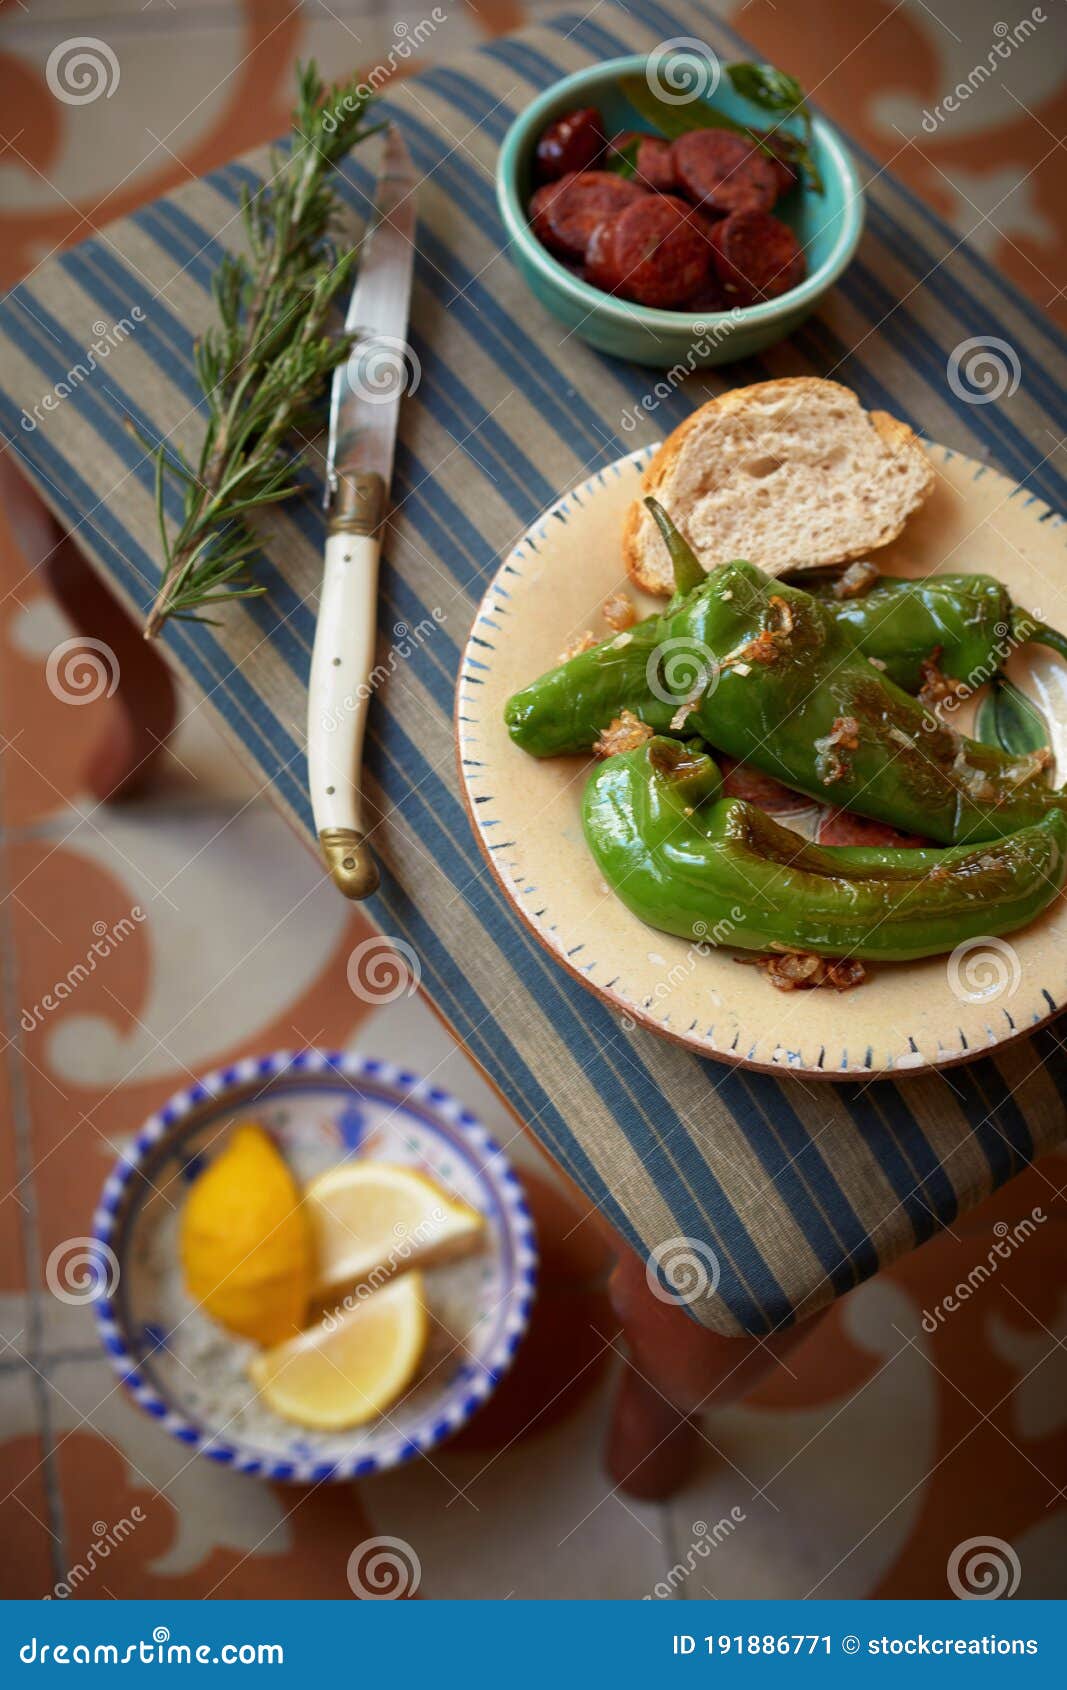 plate of fresh roasted green chili peppers